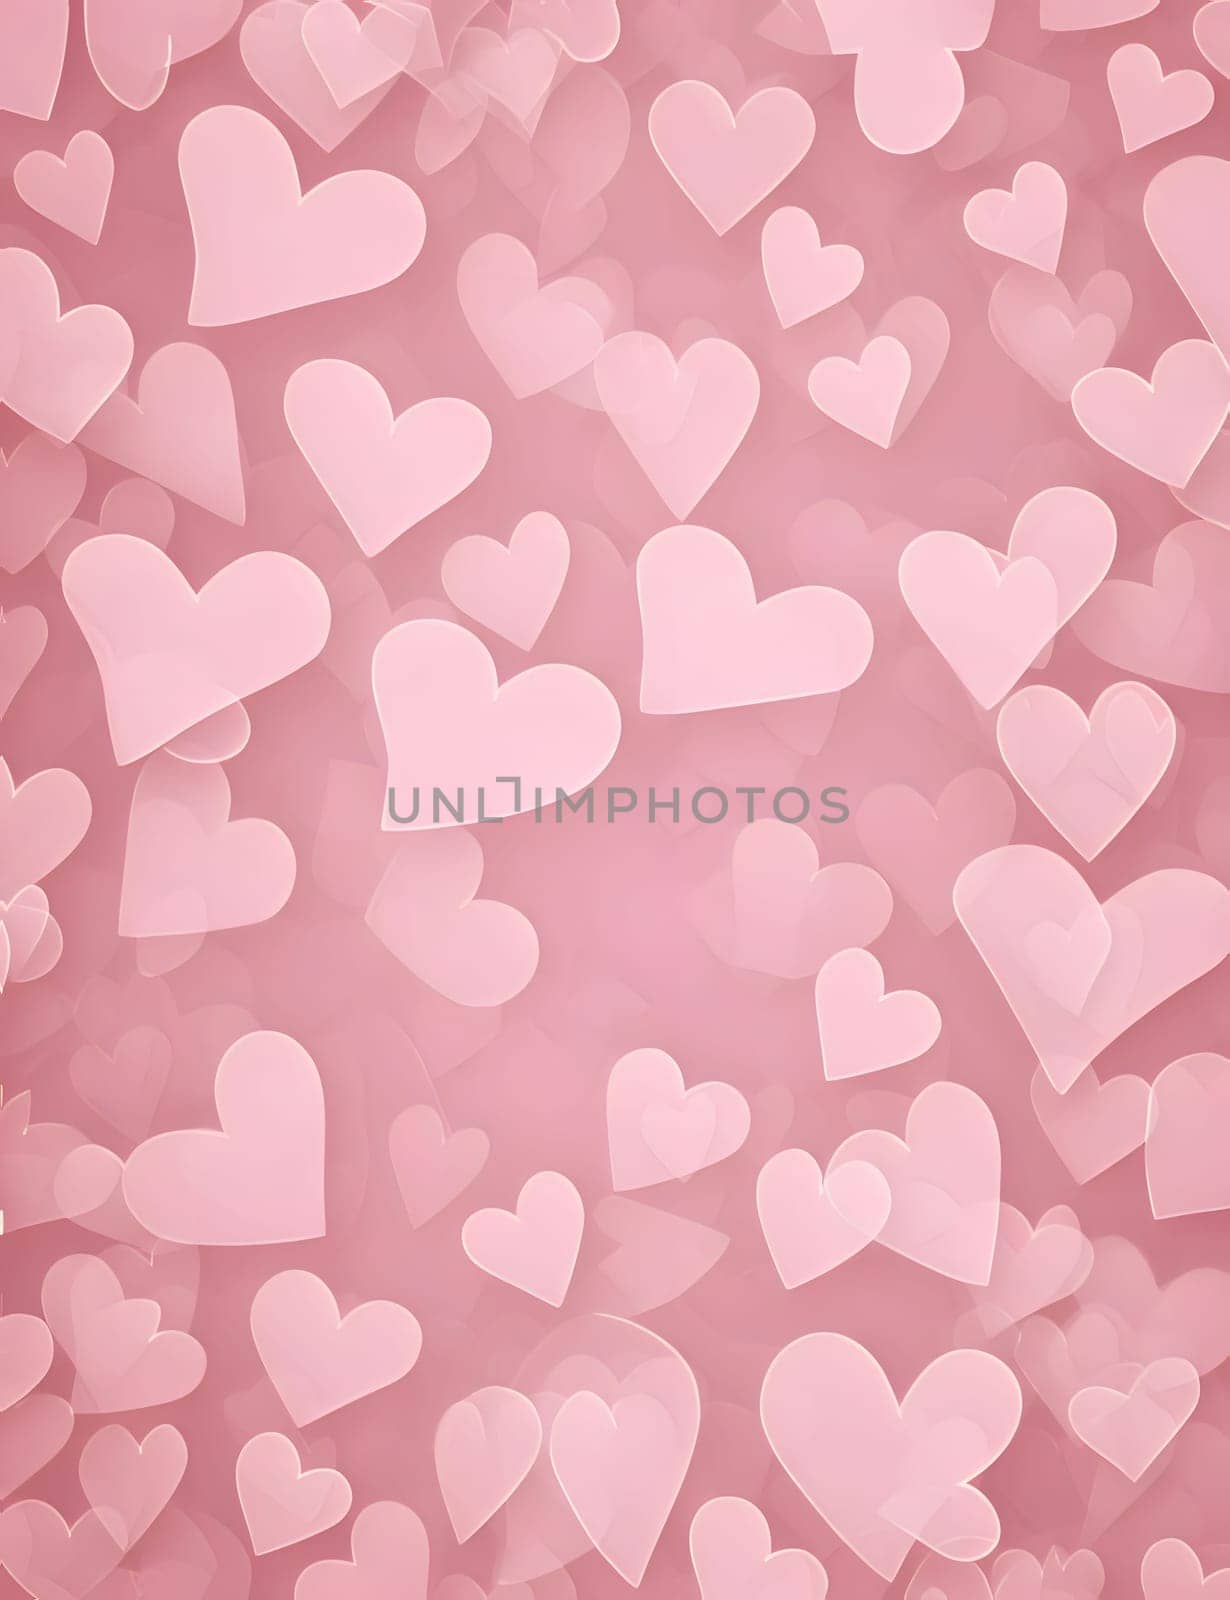 Elegant and modern. Pink hearts as abstract background, wallpaper, banner, texture design with pattern - vector. Dark colors.